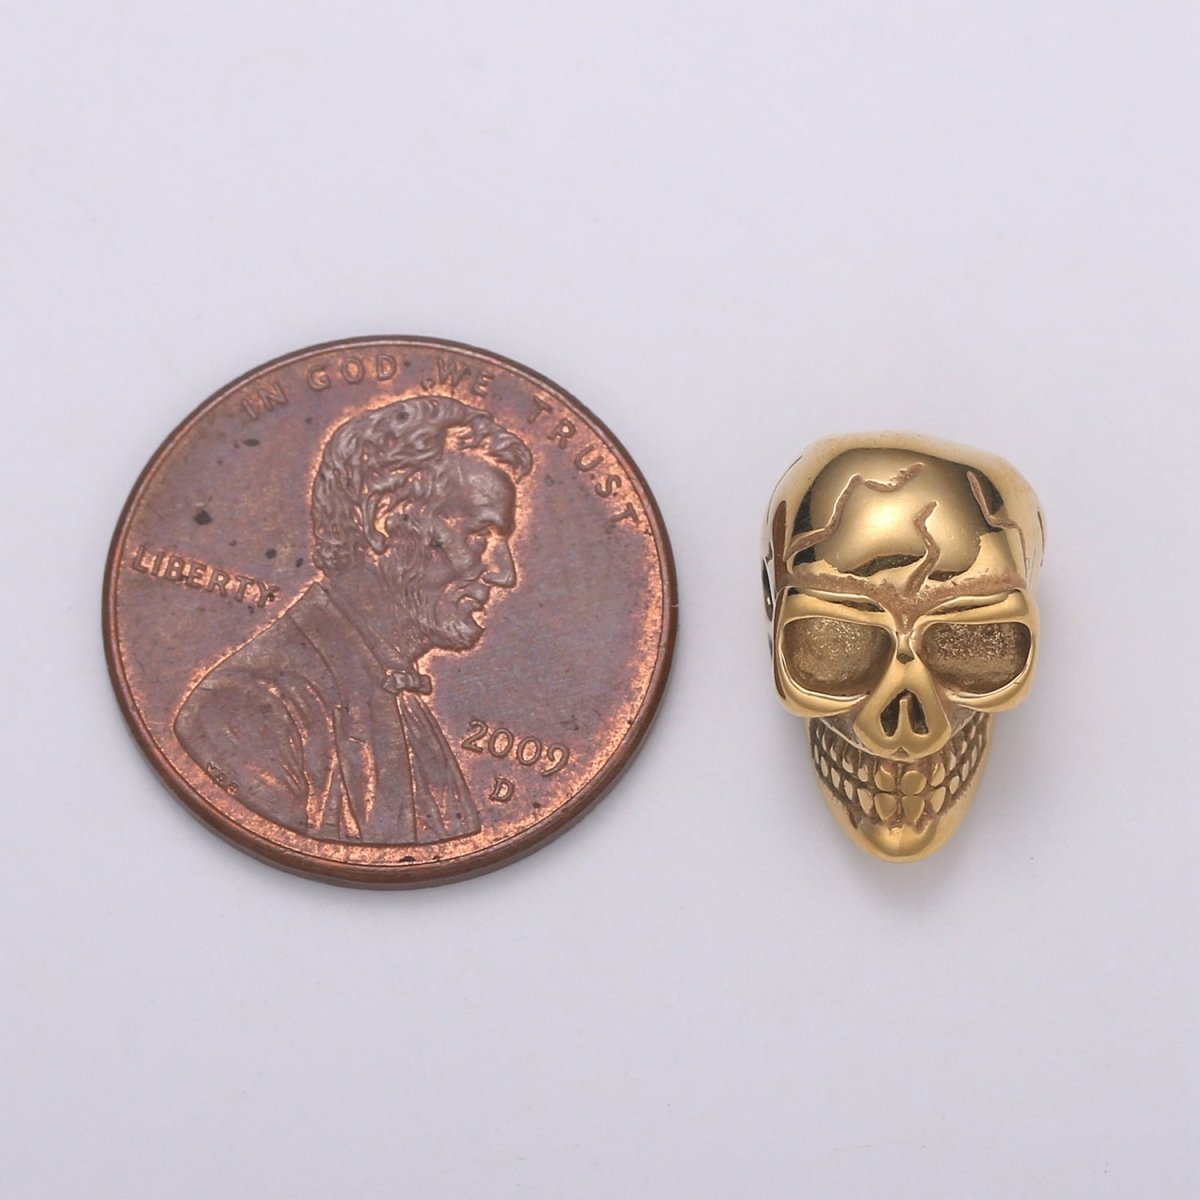 Gold Stainless Steel 3D Skull Head Bead Scary, Halloween Season, Bracelet Charm Bead Finding Connector Spacer for Jewelry Making B-453 - DLUXCA